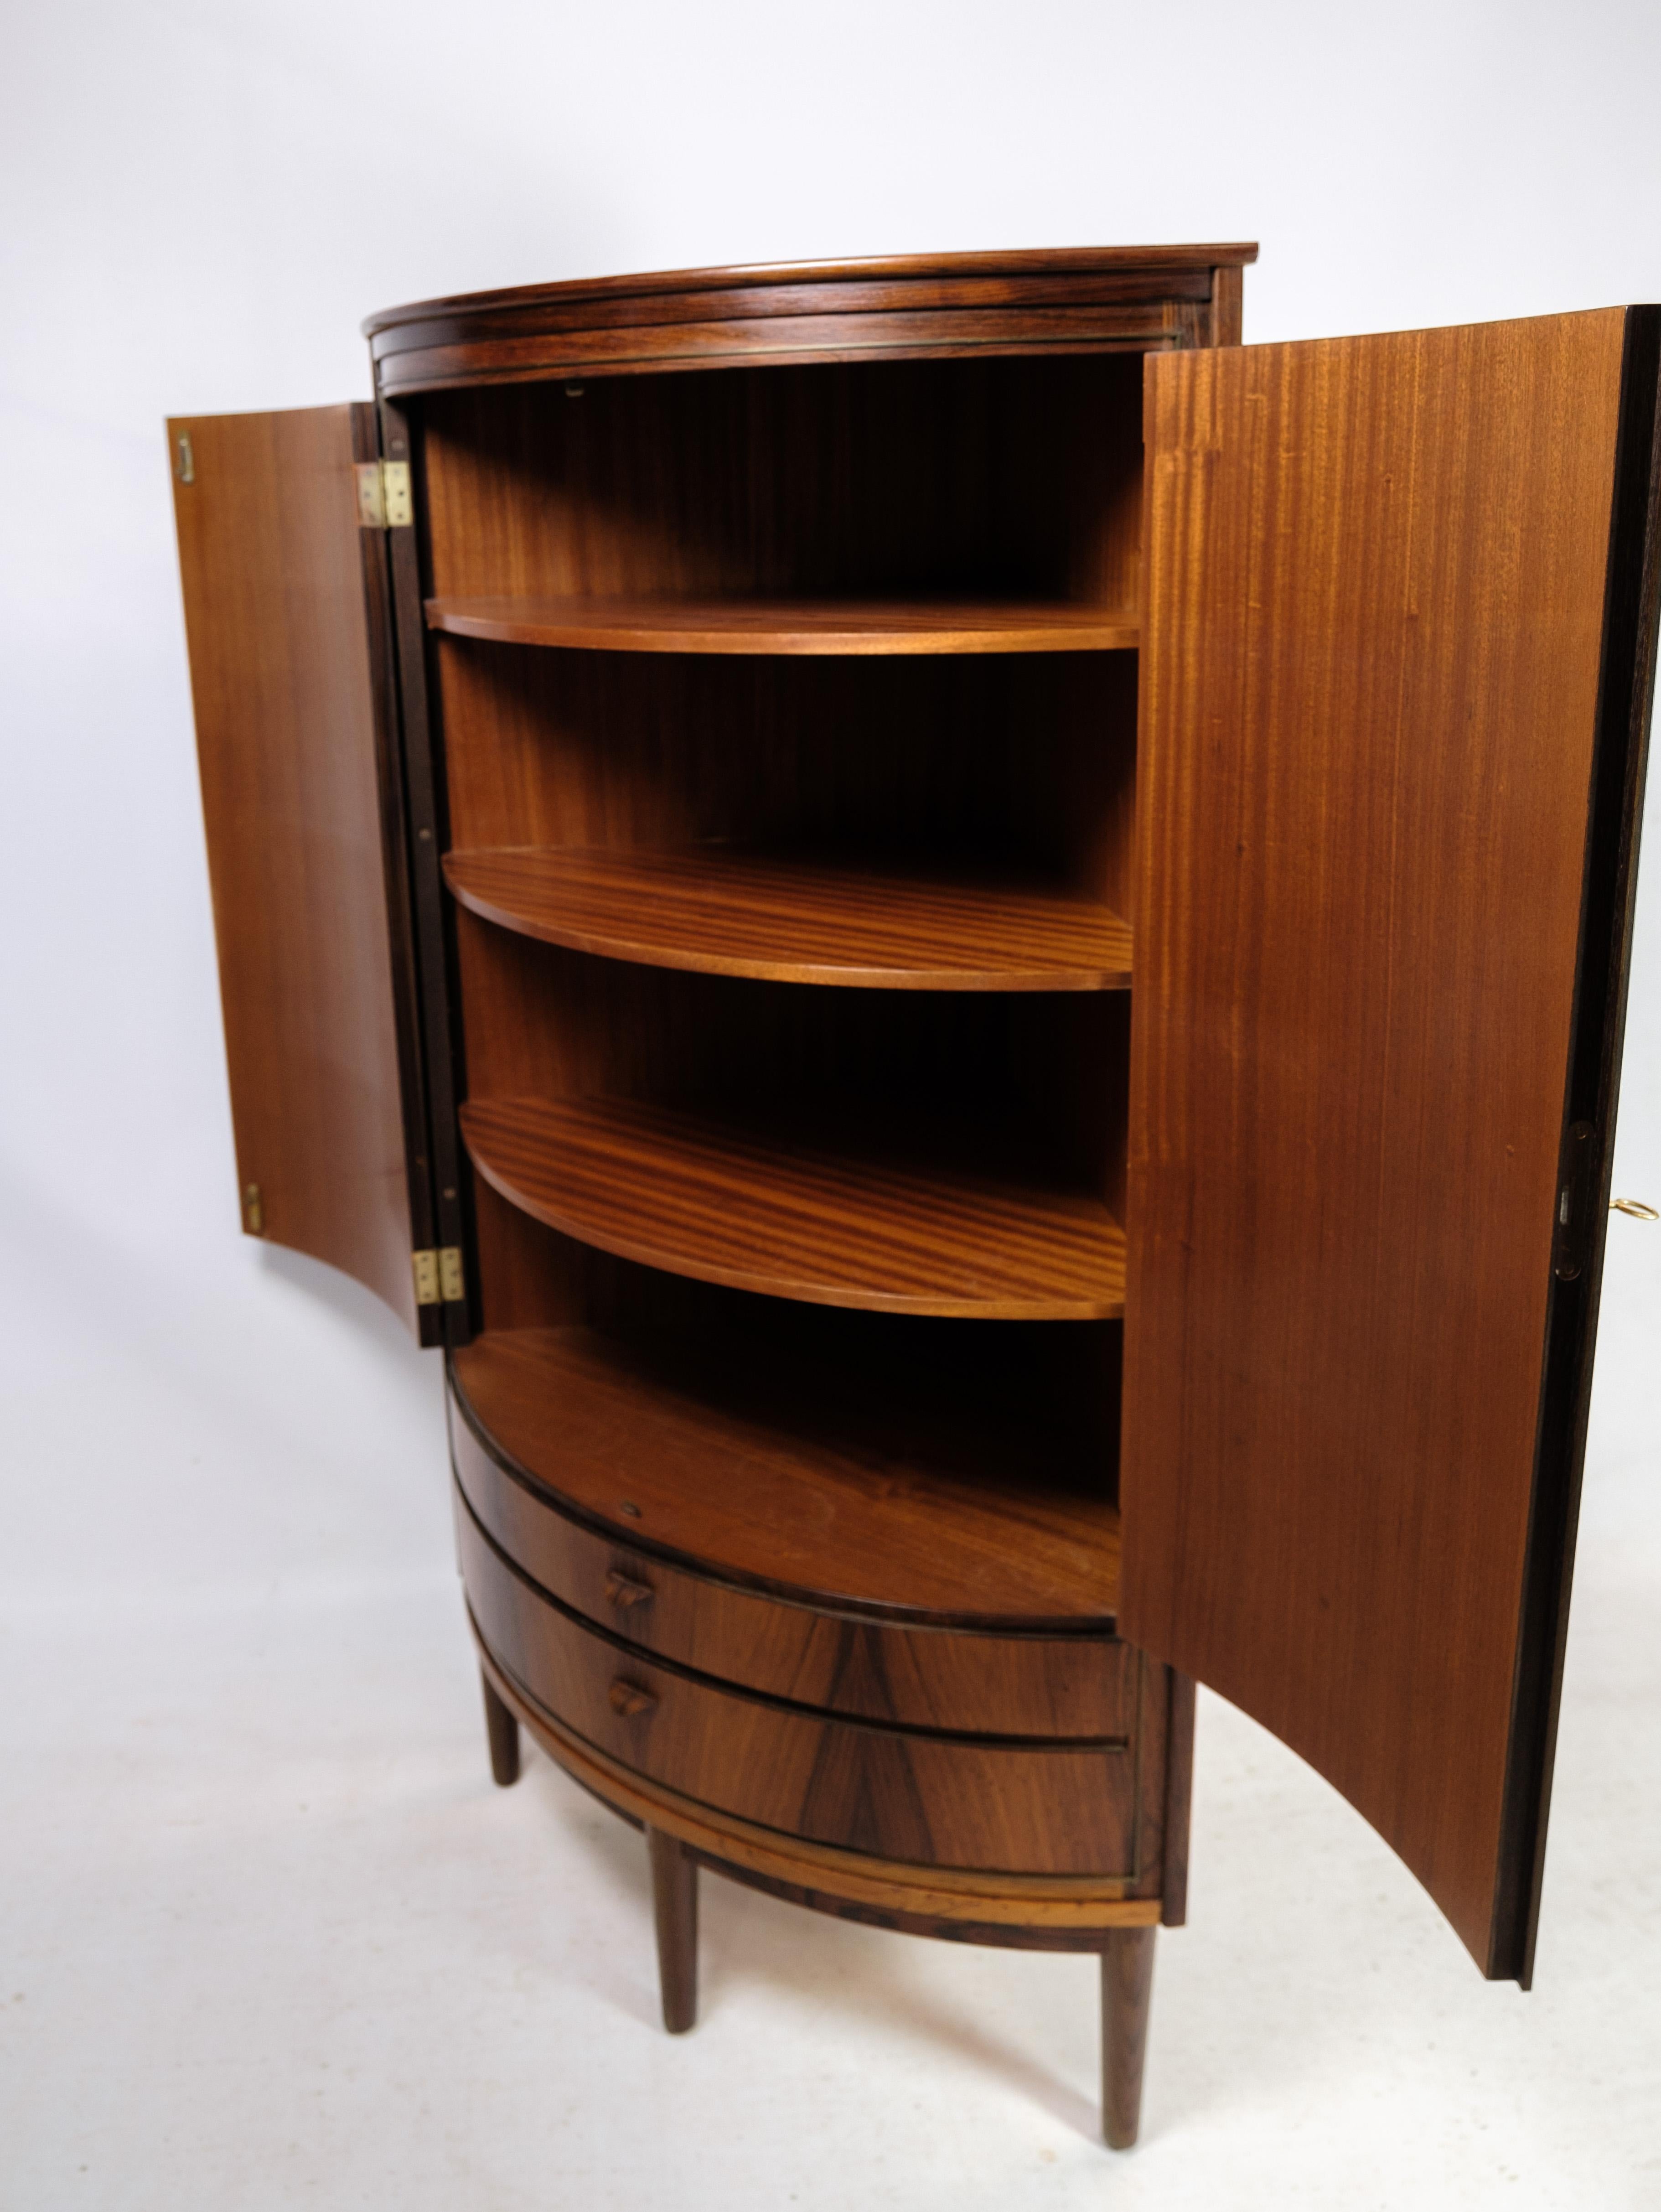 Corner cabinet in rosewood of Danish design from around the 1960s. The corner cabinet has 2 drawers at the bottom, as well as 2 doors with three shelves inside the cabinet. The cabinet has 4 legs in total, which are visible from the front. It is a